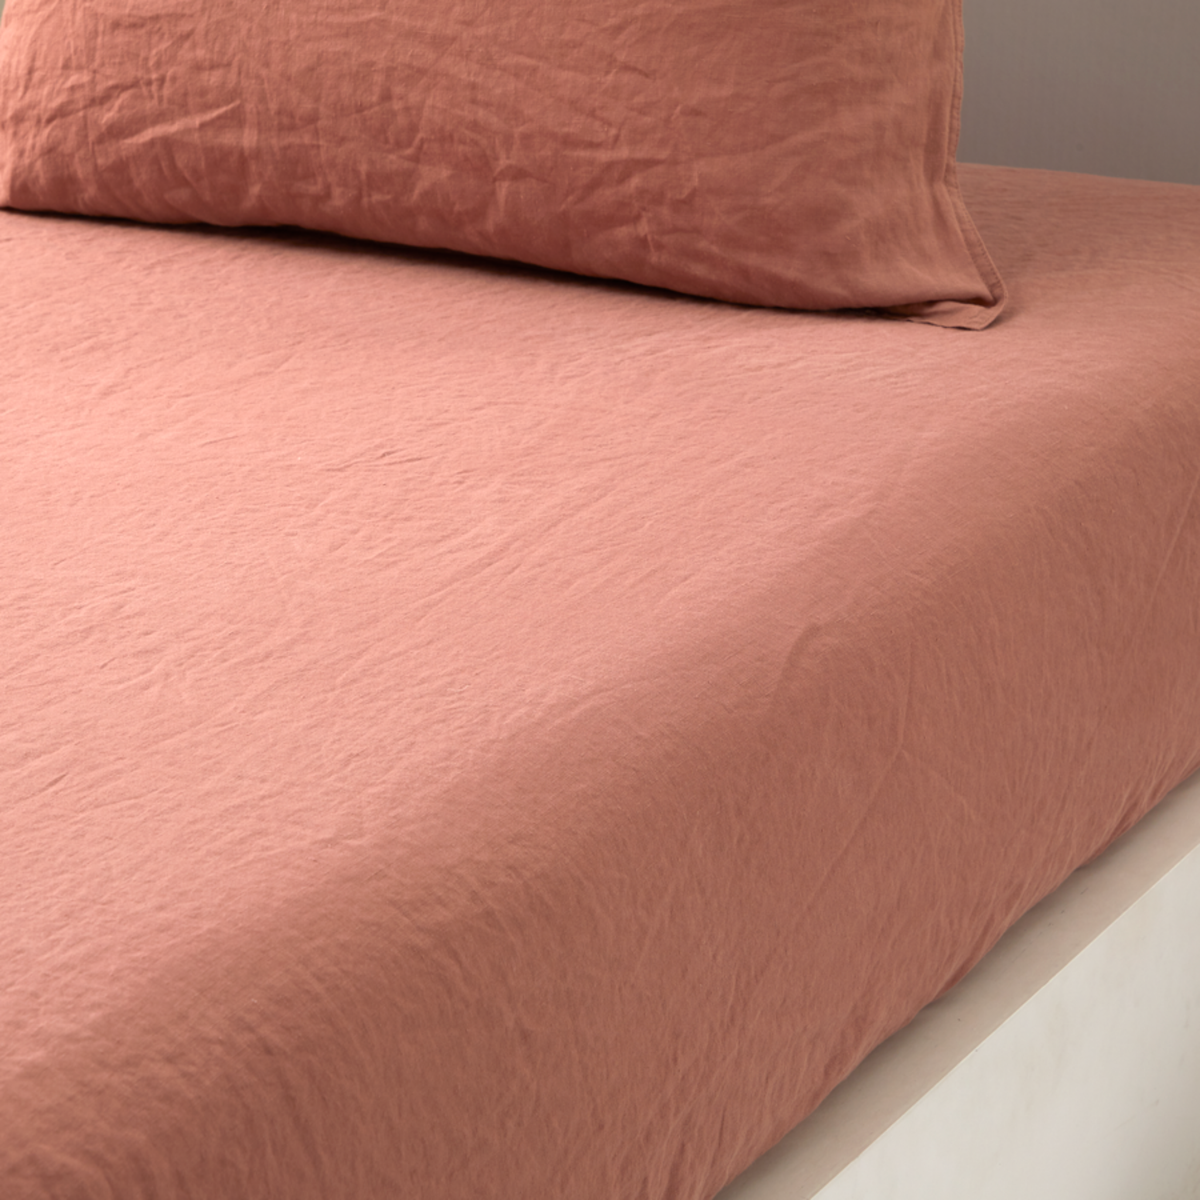 Fitted Sheet of Sienna Yves Delorme Originel Bedding